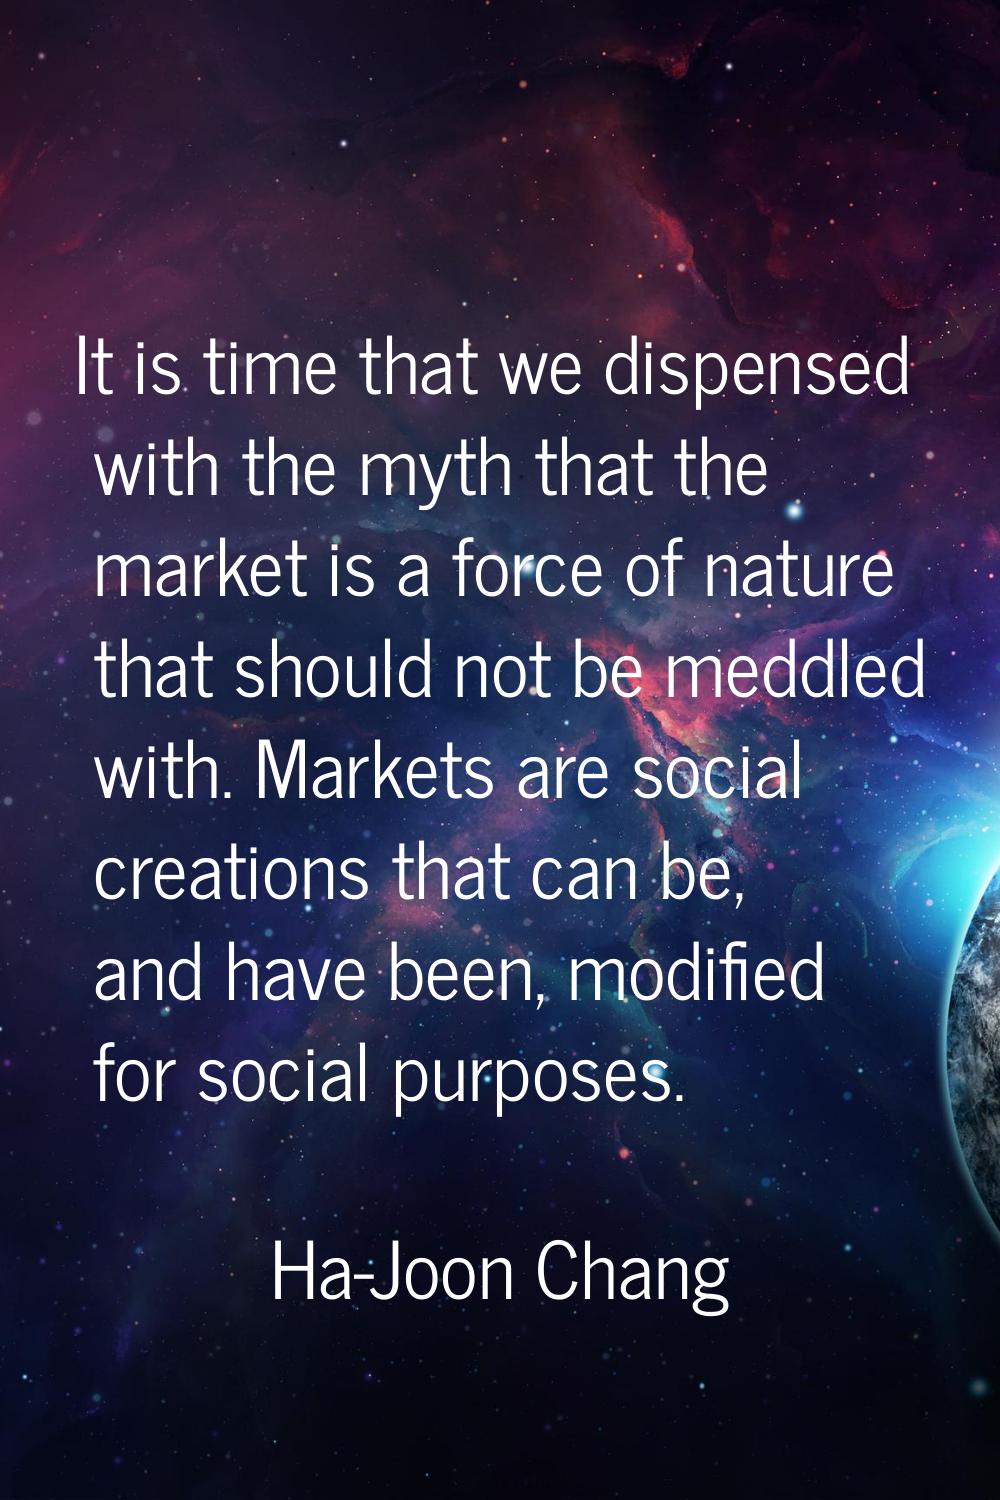 It is time that we dispensed with the myth that the market is a force of nature that should not be 